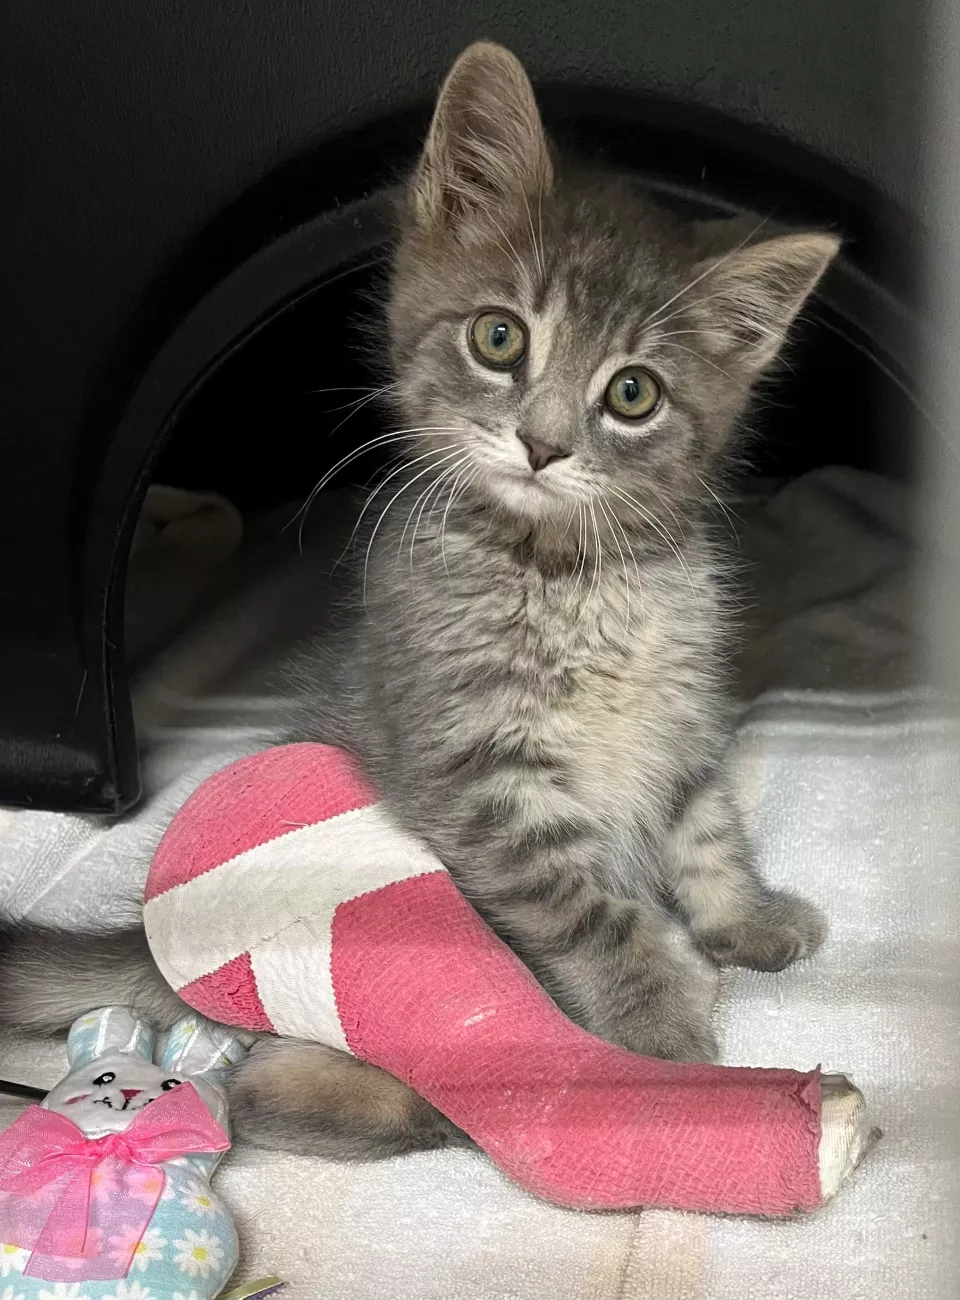 Brown kitten wearing pink cast looking at the camera